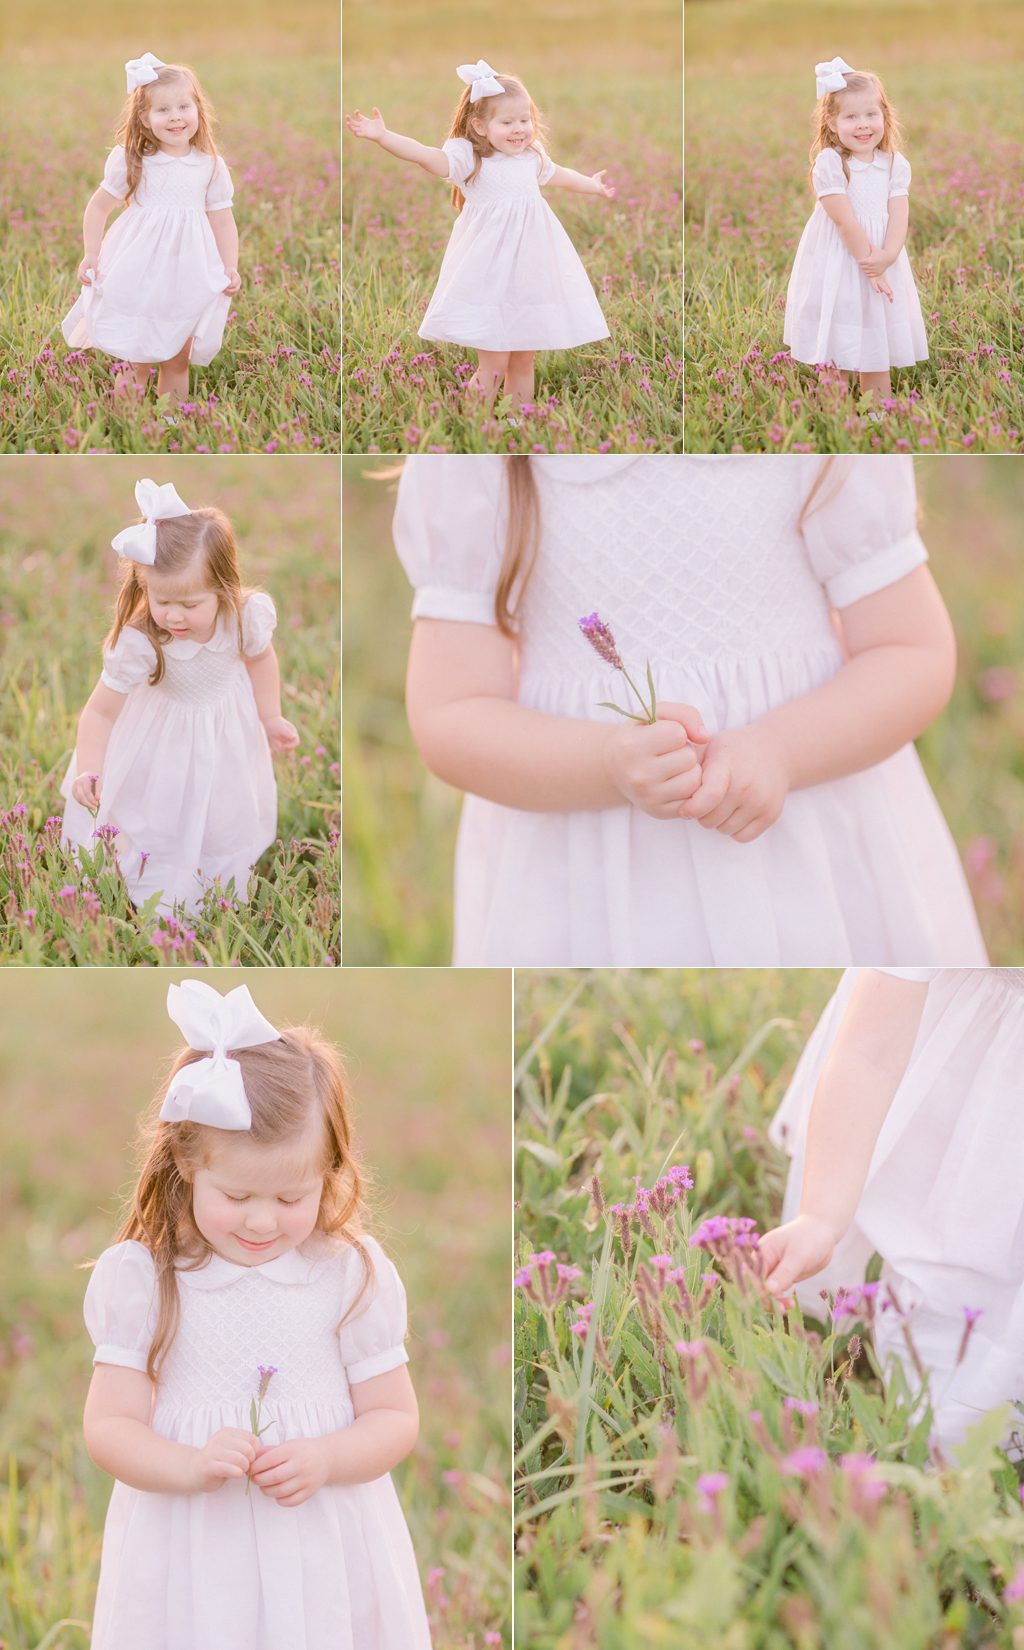 portraits from a children photography session in field of purple flowers near Athens, GA.